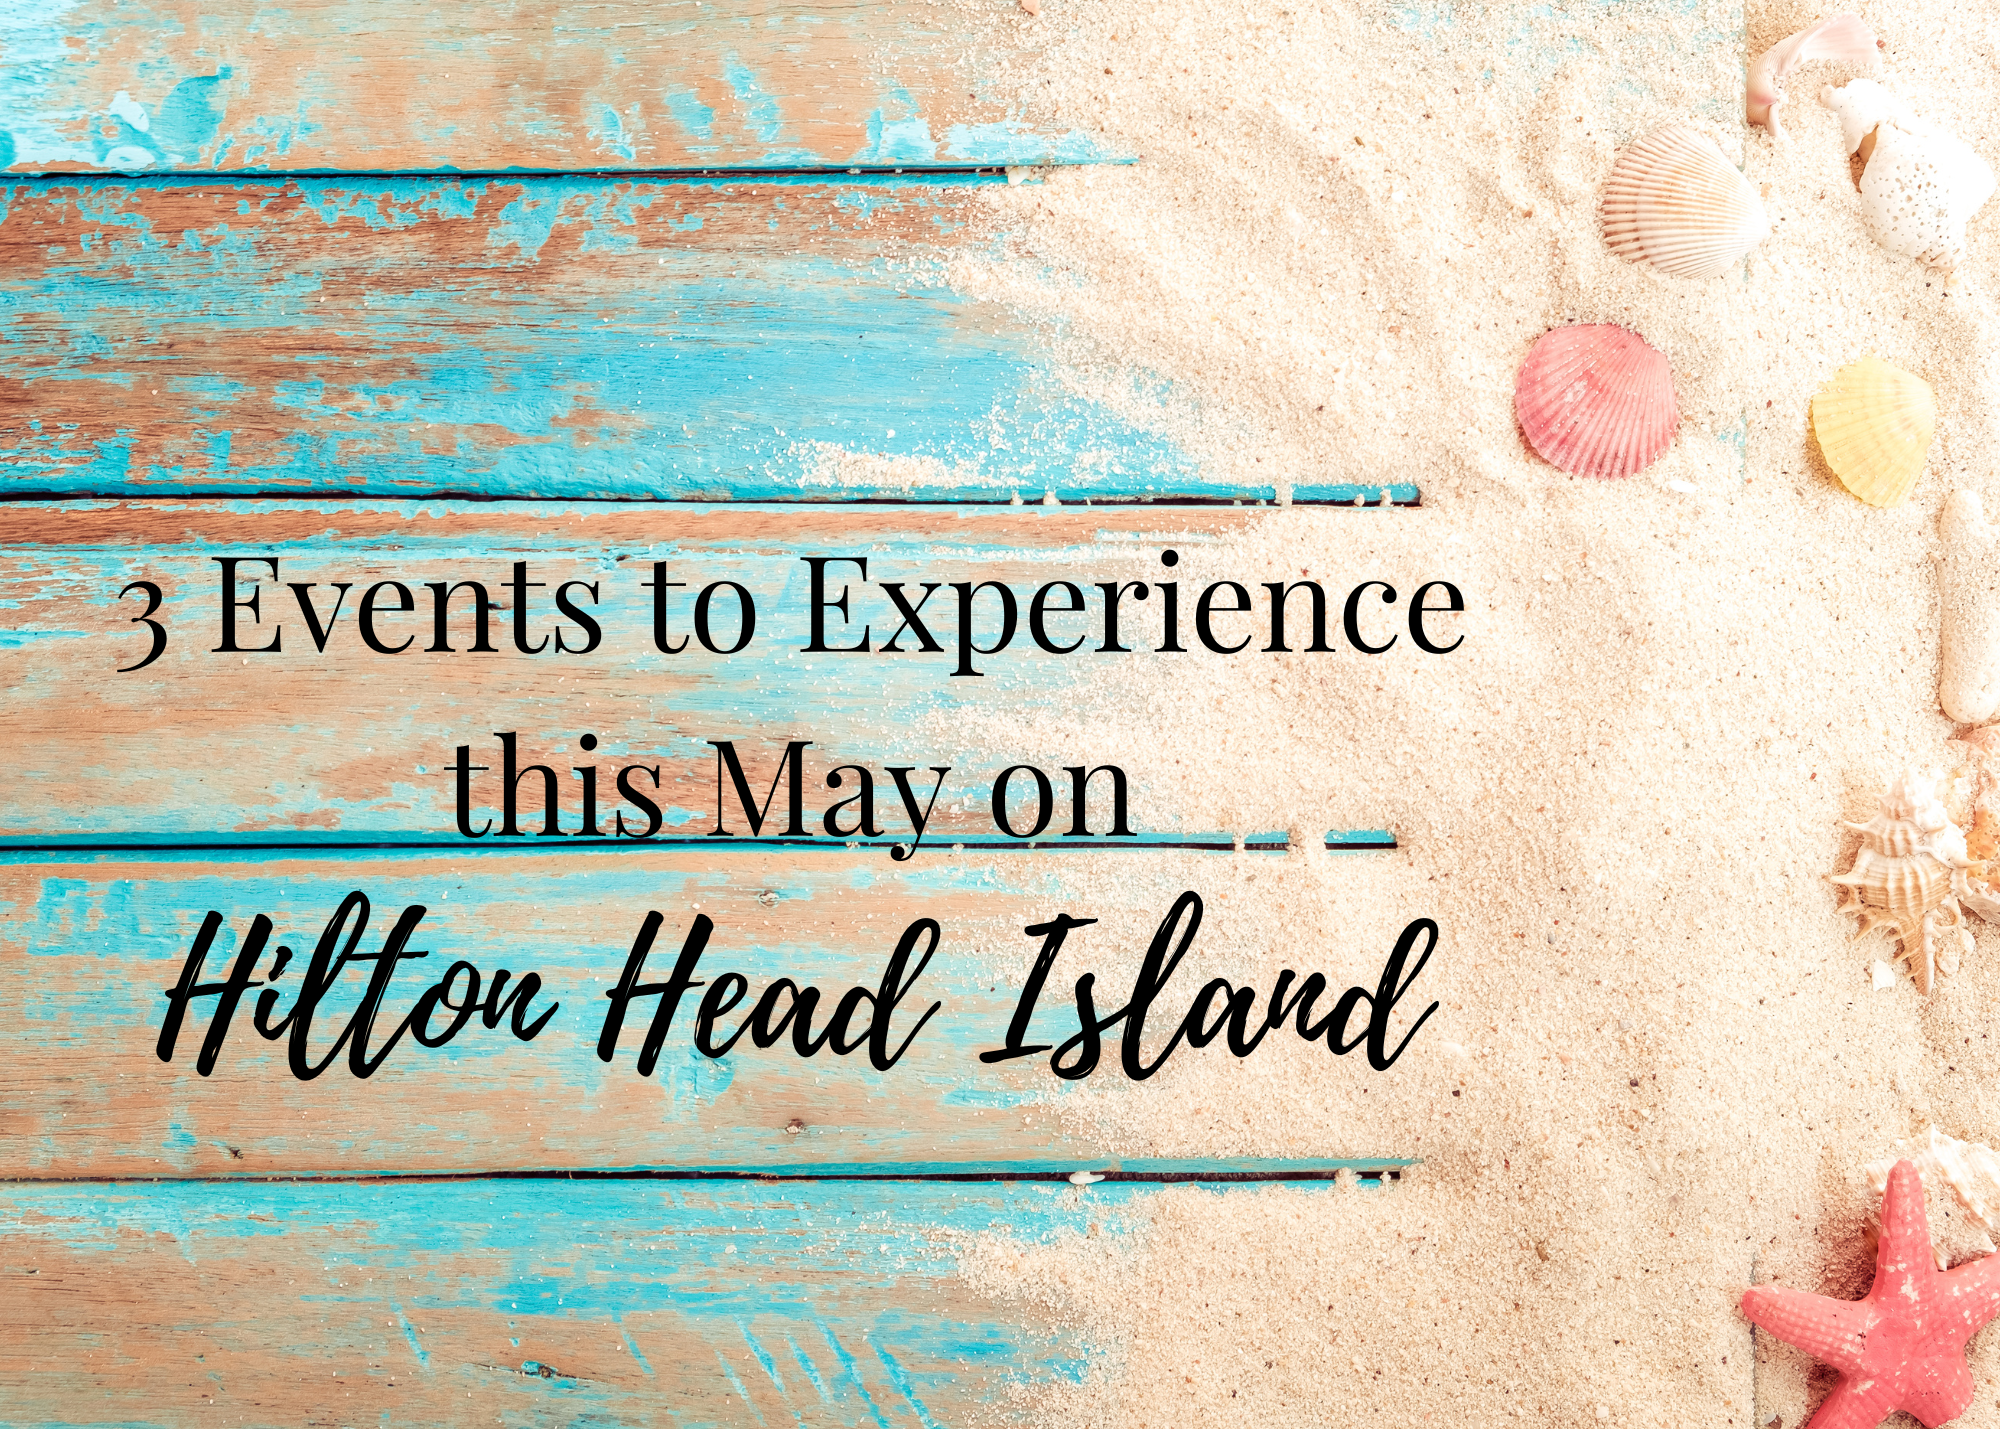 Wooden Teal Background with sand on right side and seashells with words saying 3 Events to Experience this May on Hilton Head Island